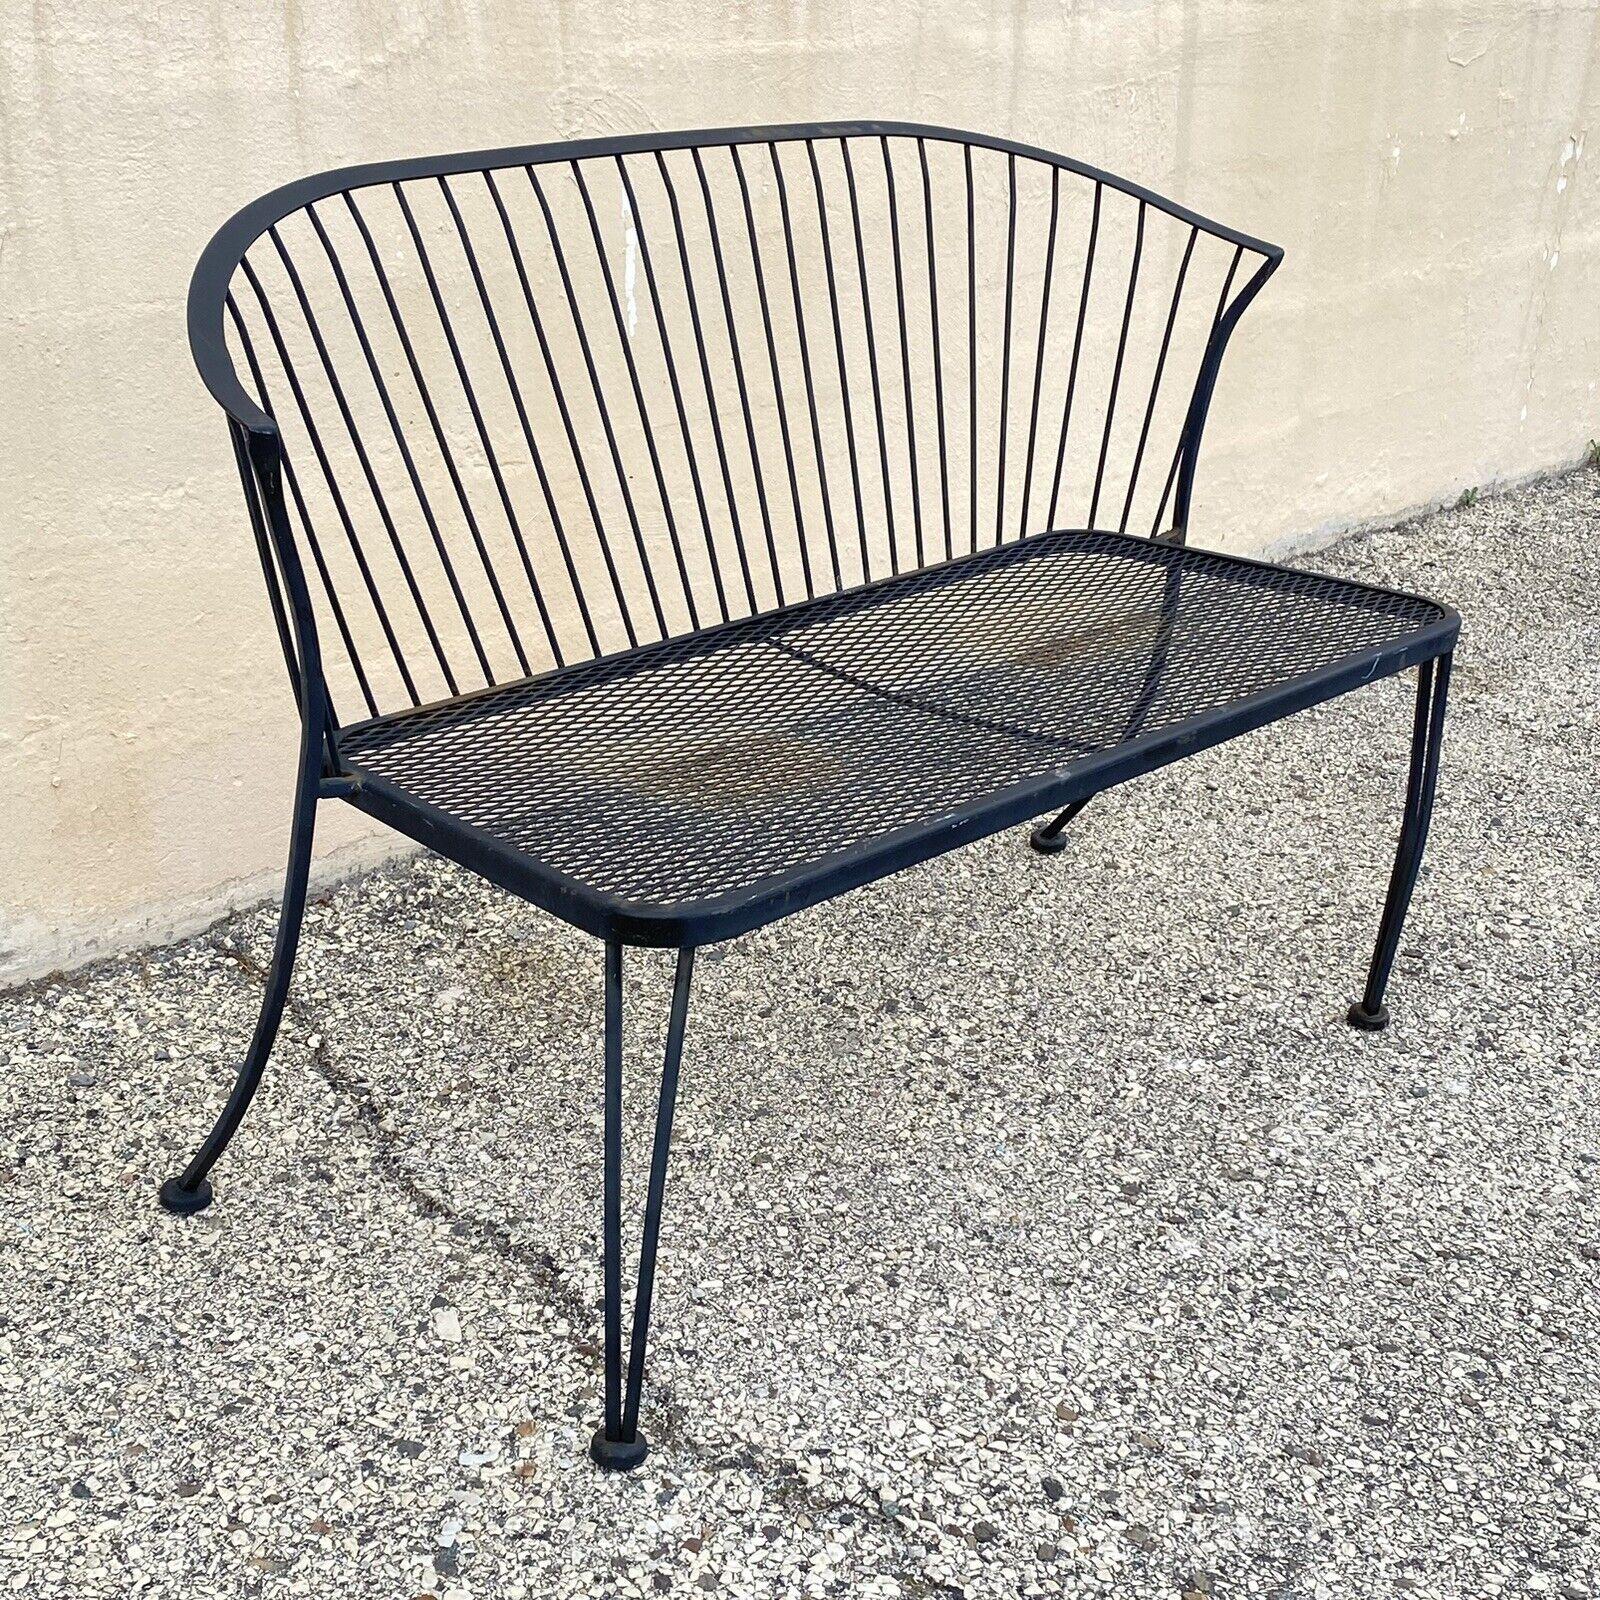 Russell Woodard Pinecrest Style Wrought Iron Garden Patio Loveseat Bench. Circa Mid to Late 20th Century. Measurements: 31